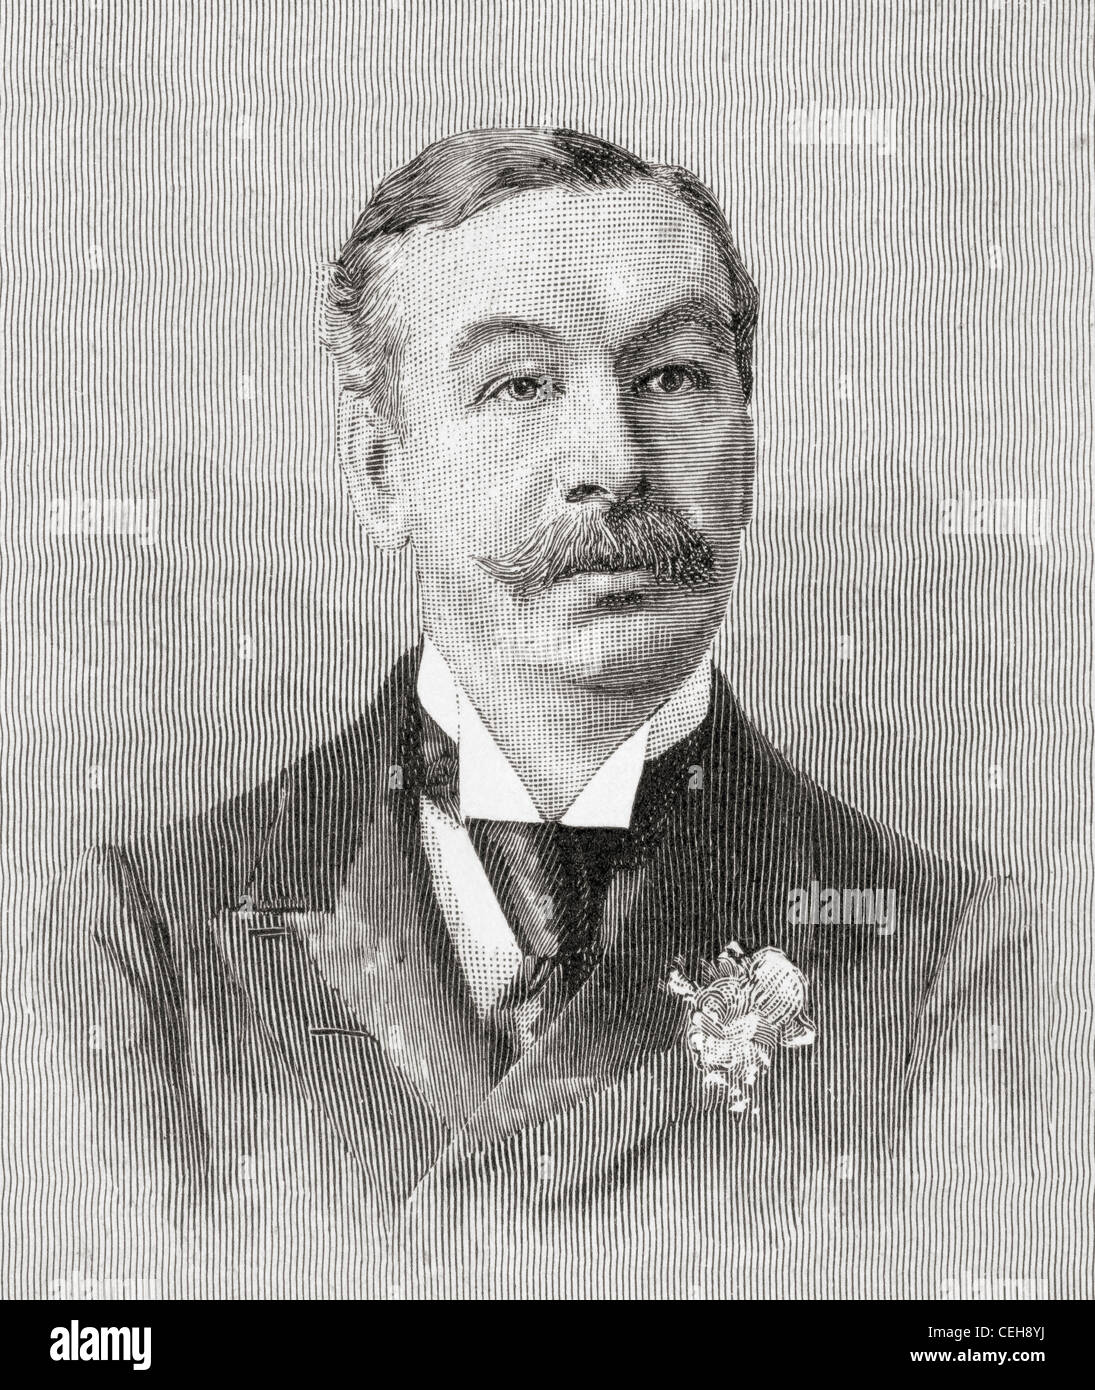 Charles Thomson Ritchie, 1st Baron Ritchie of Dundee, 1838 – 1906. British businessman and Conservative politician. Stock Photo